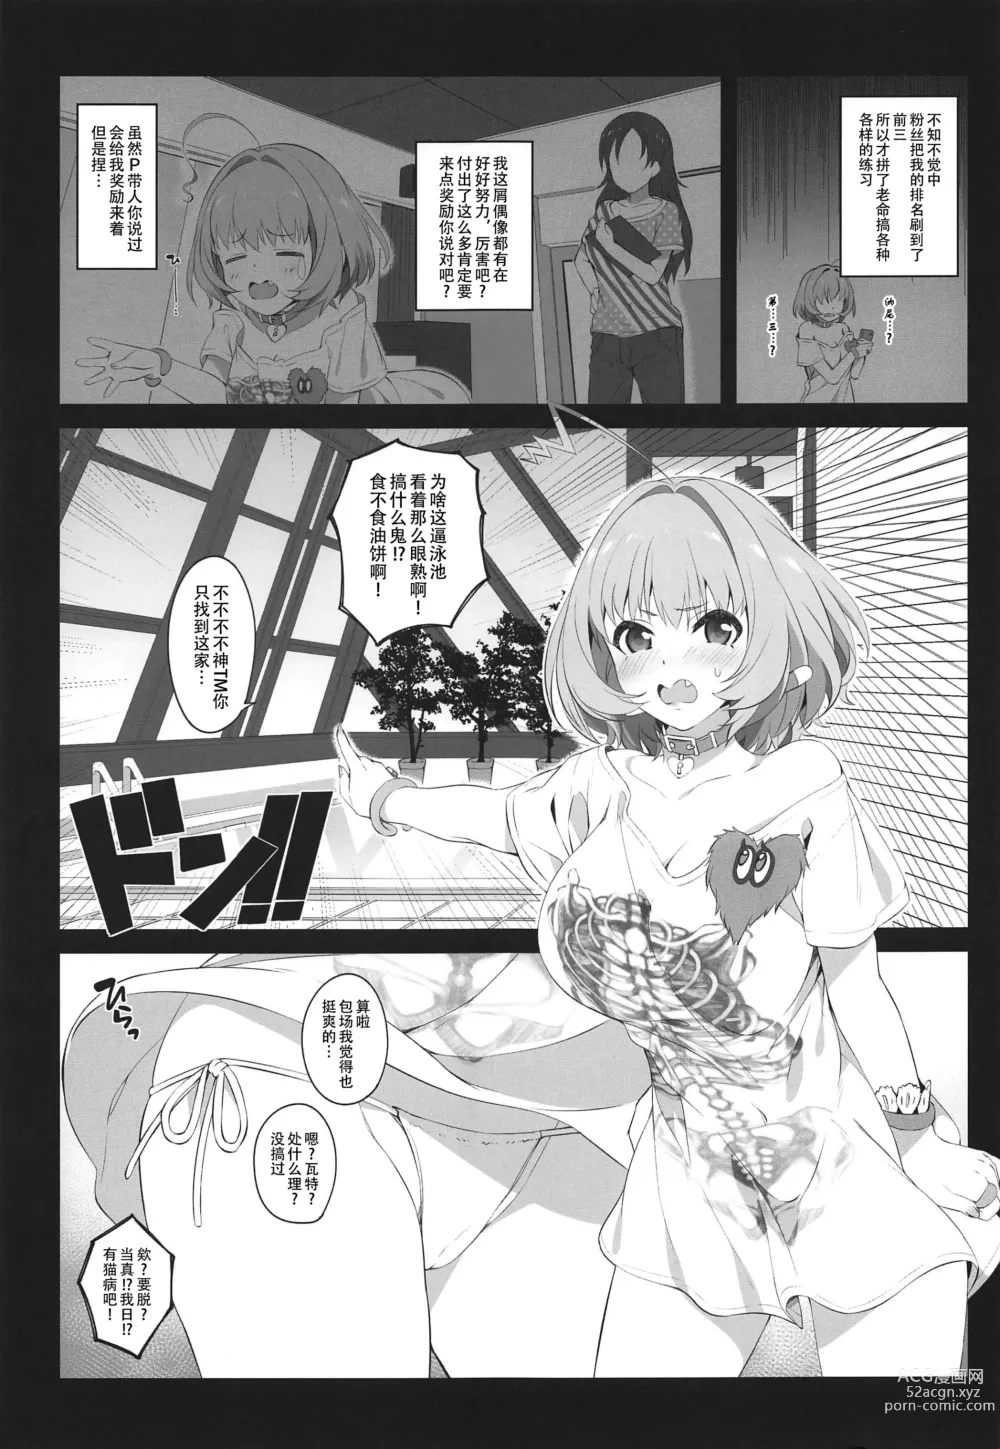 Page 21 of doujinshi Three stars have a dream with sparkles.